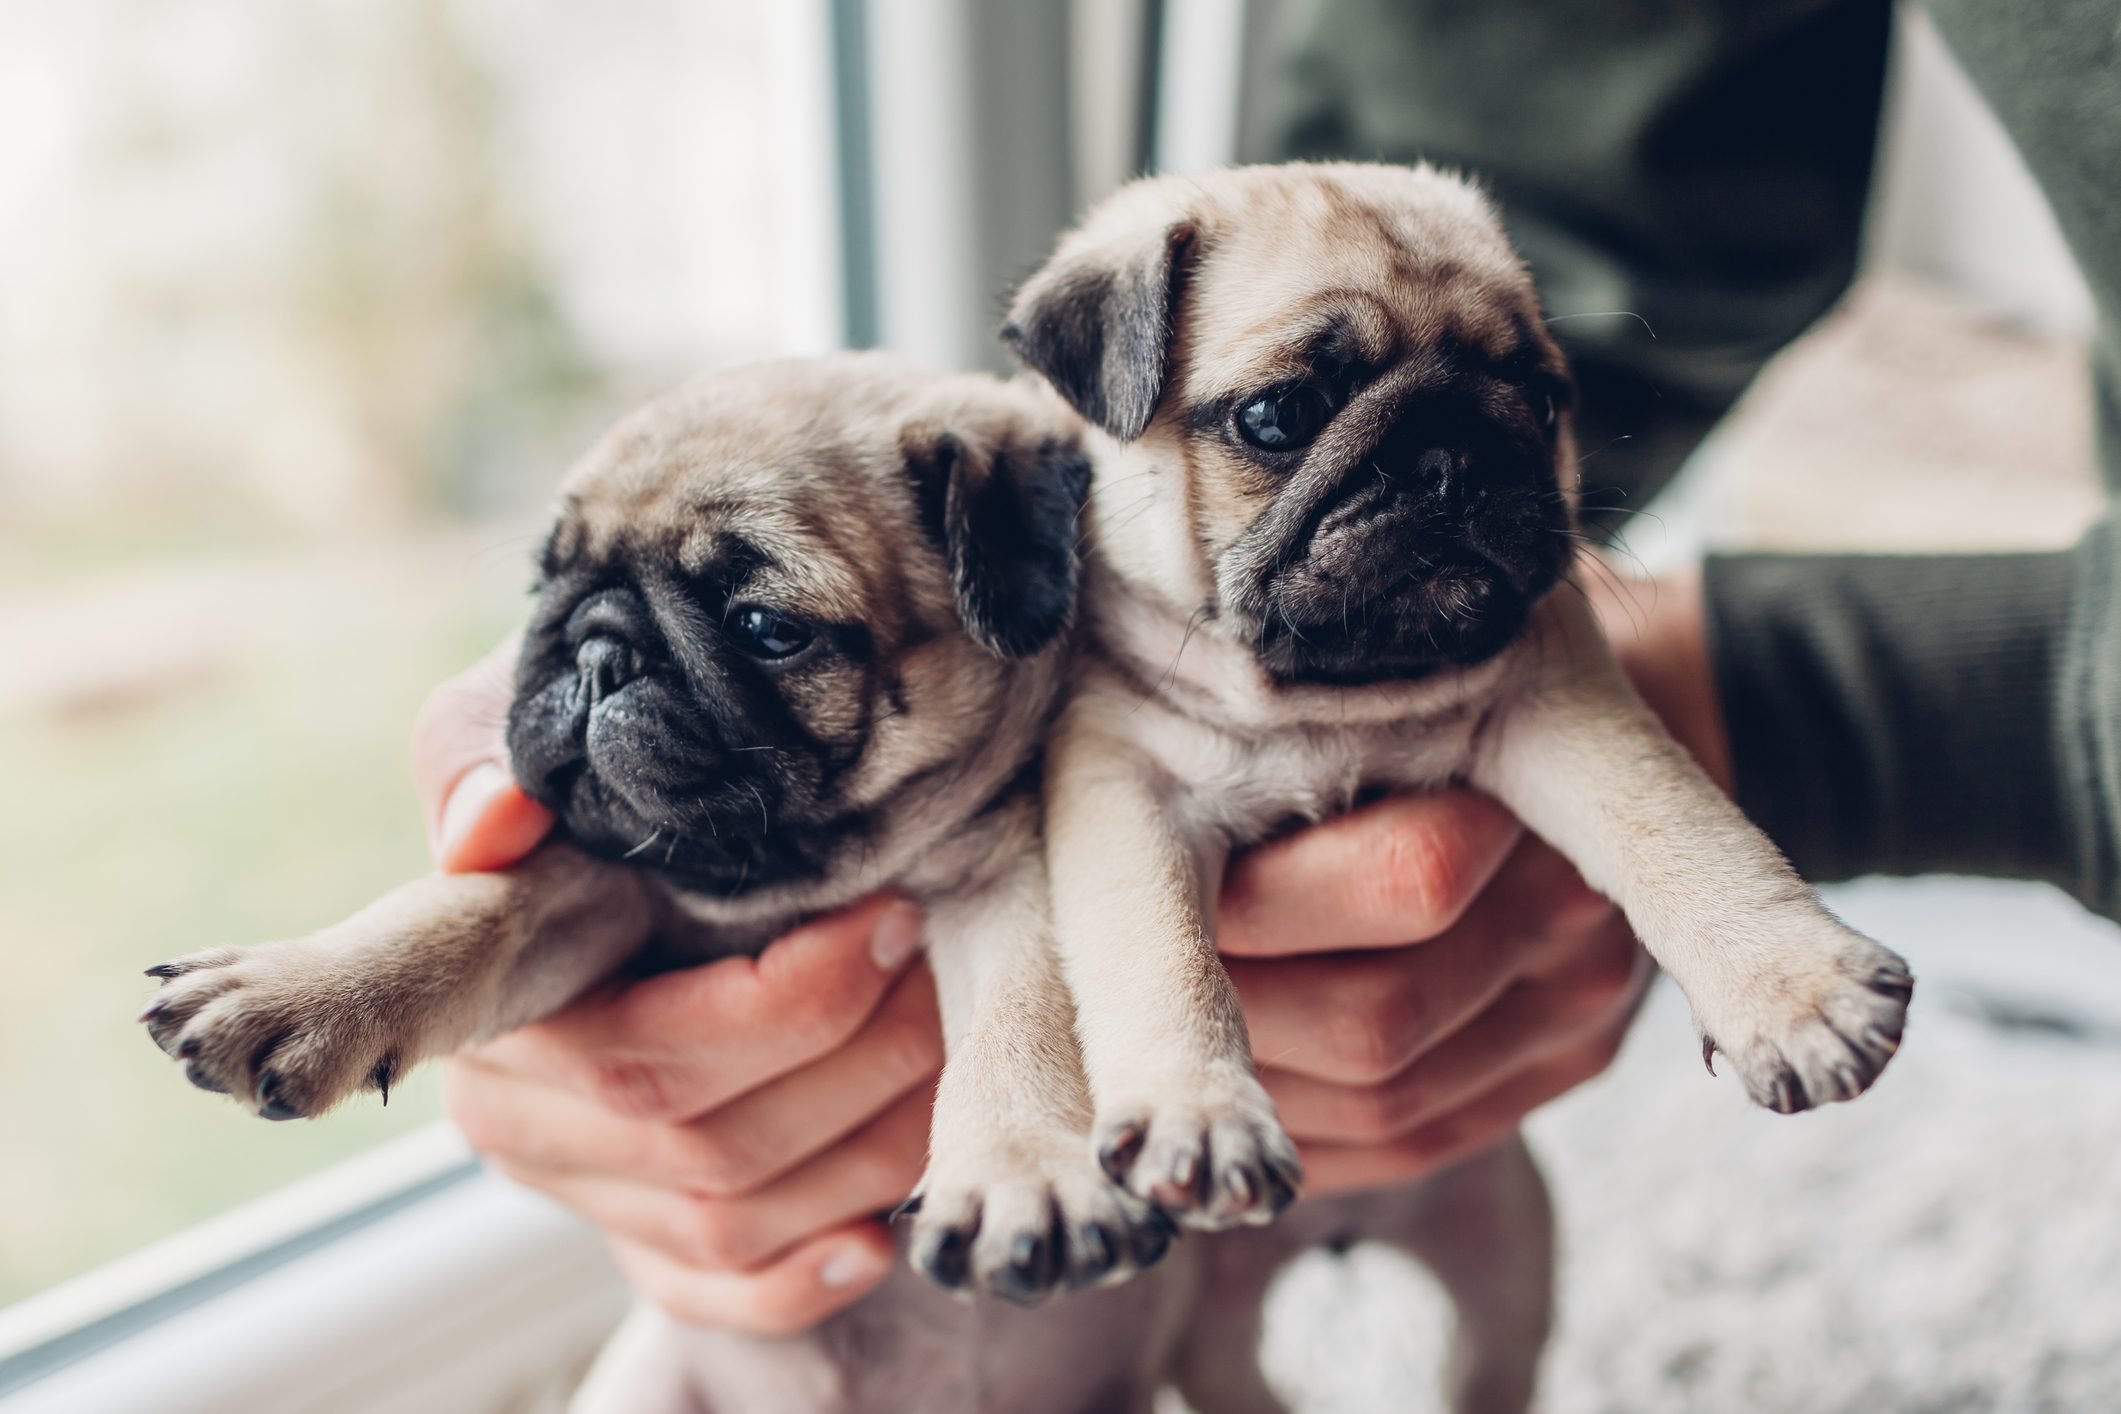 Reader's Digest Cute Pug Picture That Will Make You Want One